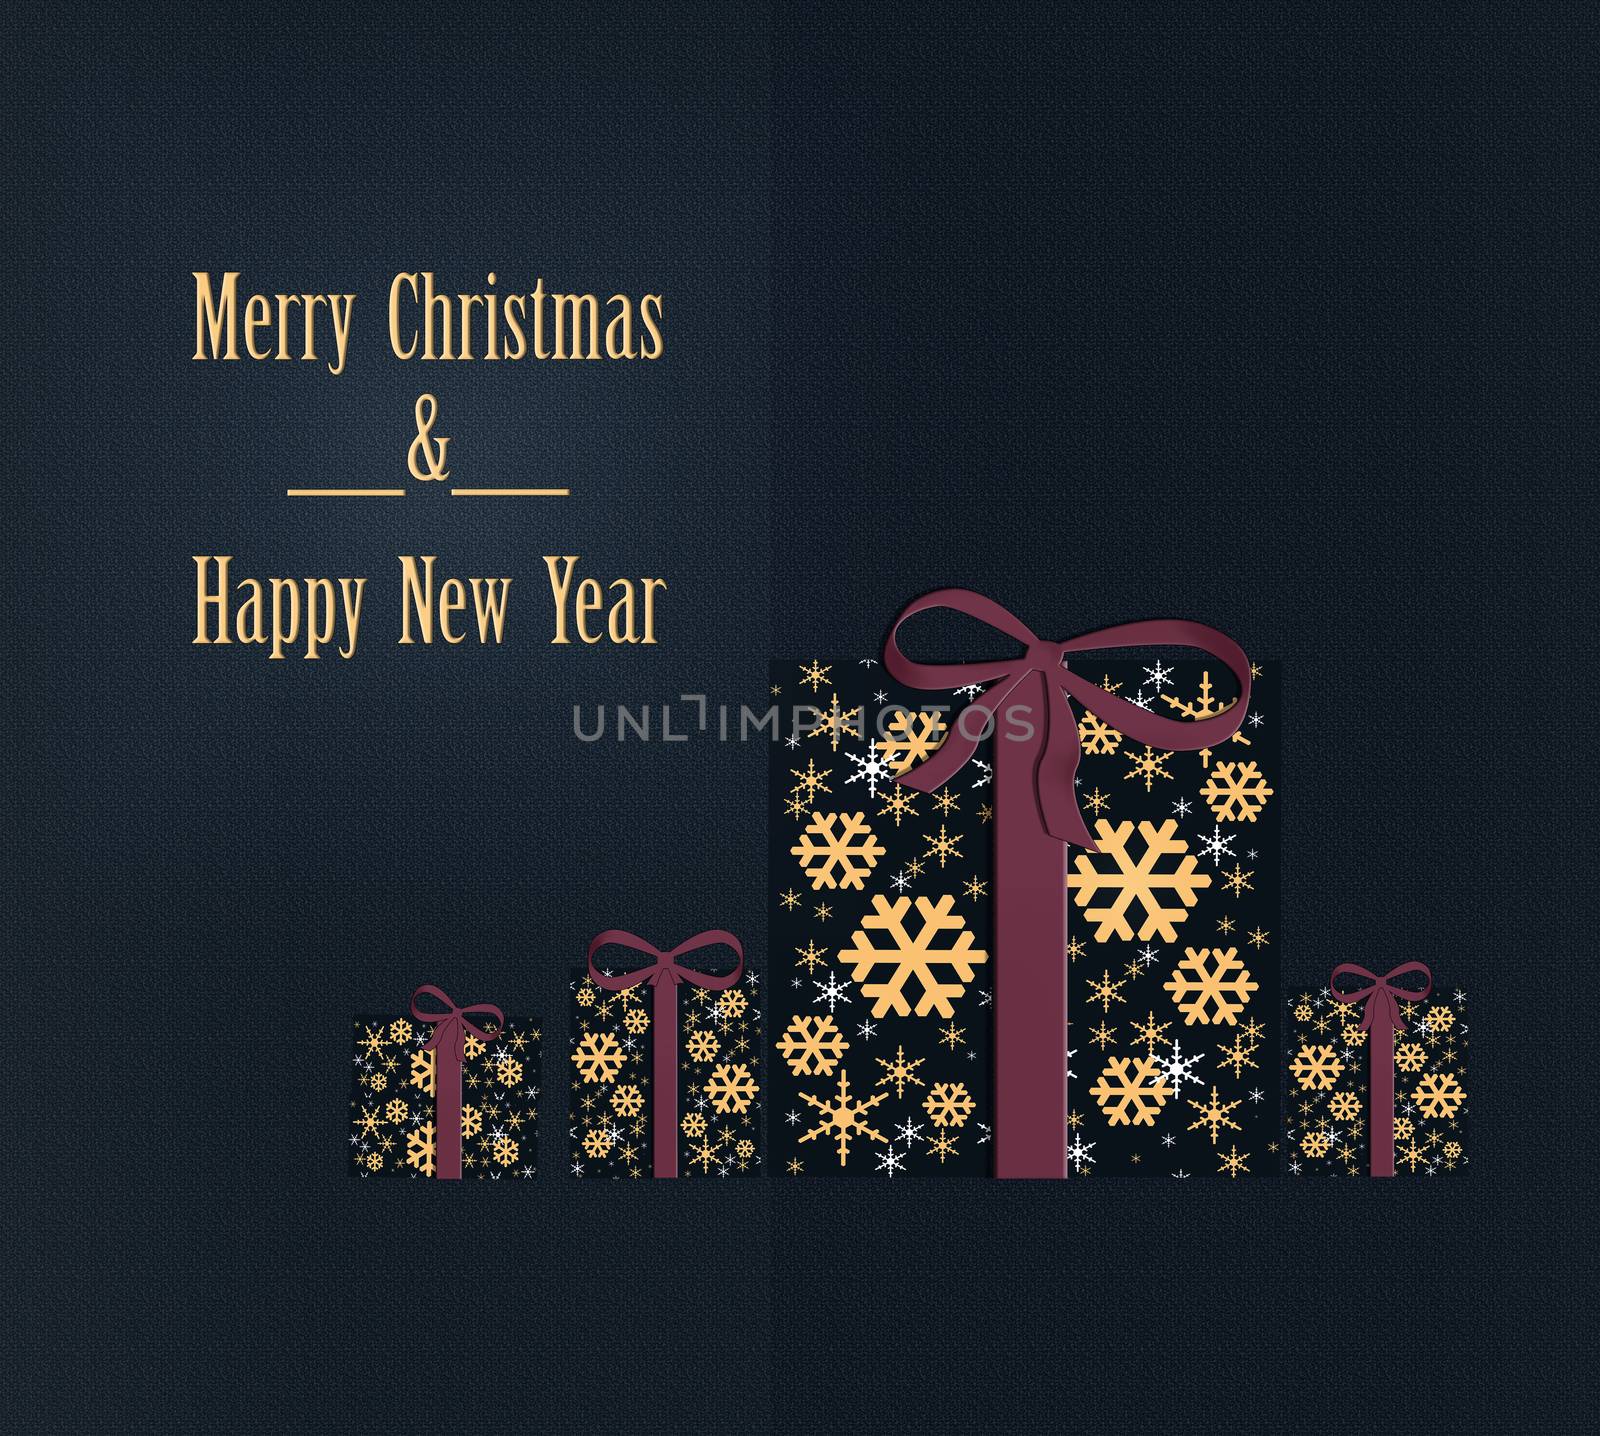 Luxury Christmas greeting card concept with gold words Merry Christmas and Happy New Year. Abstract wrapped gift boxes with golden snowflakes. Illustration